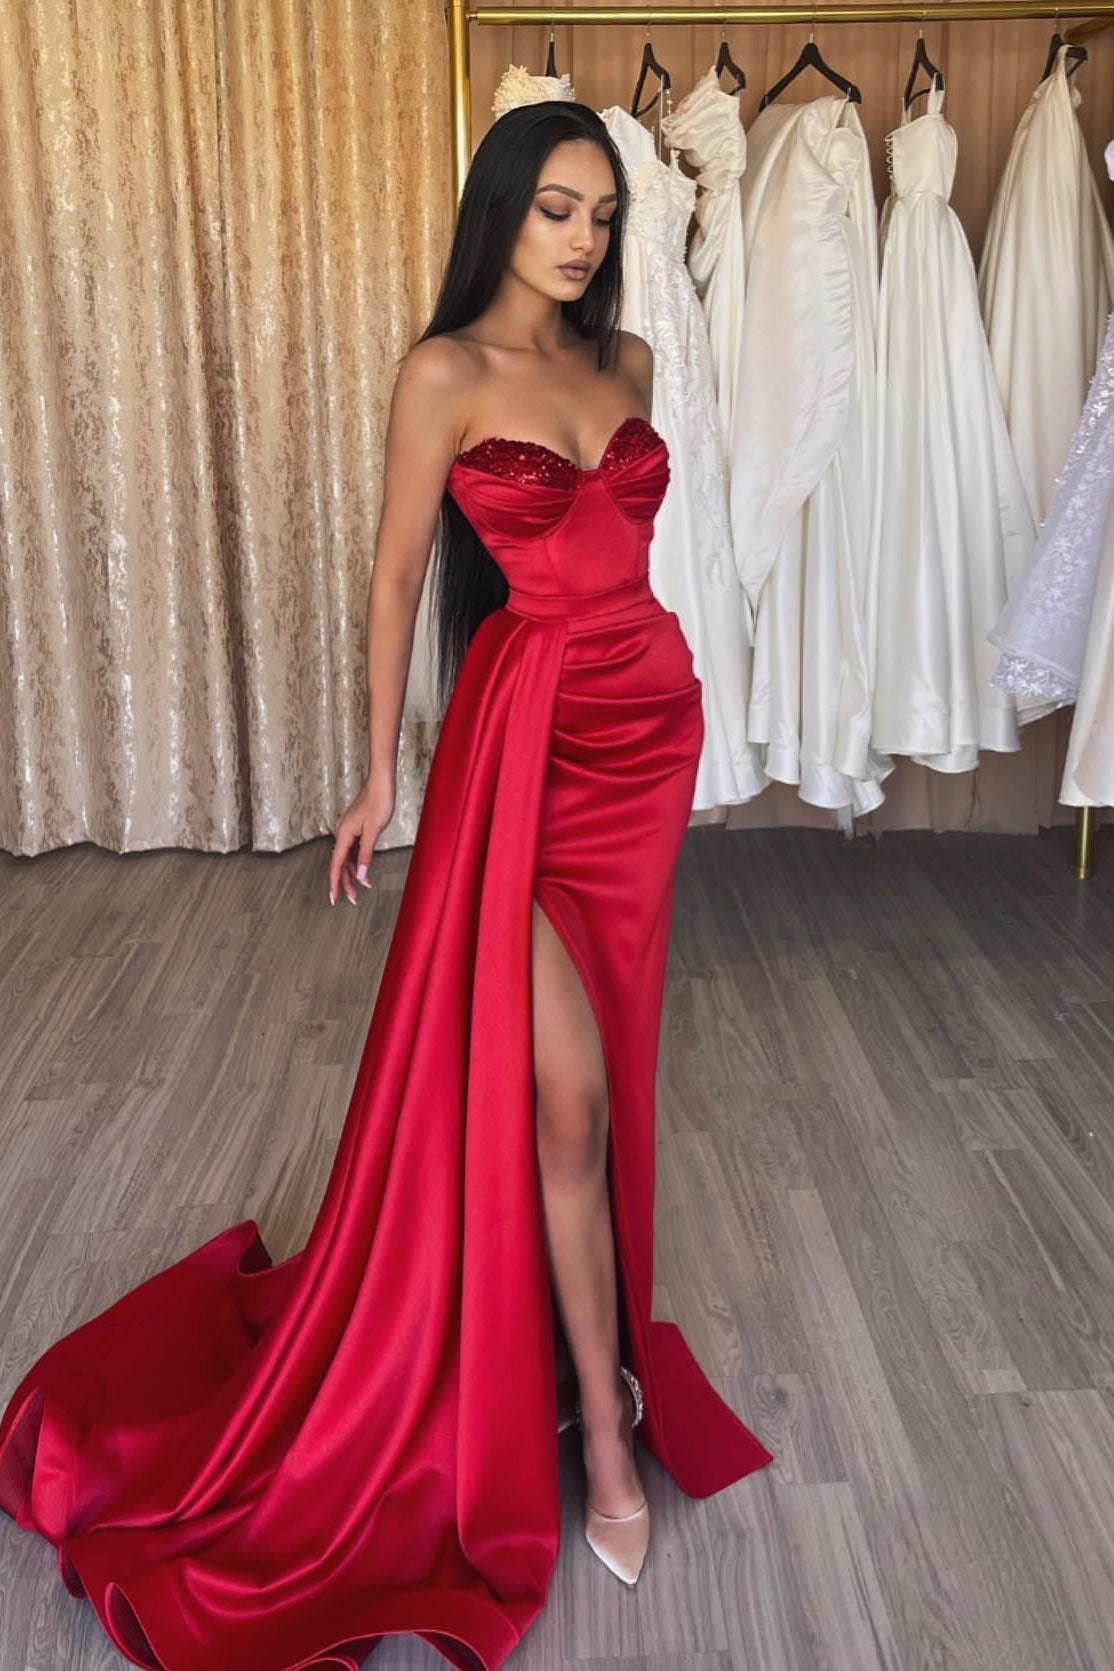 Amazing Bugundy Sweetheart Mermaid Evening Dress with Split Long, Sequins and Ruffles-Occasion Dress-BallBride